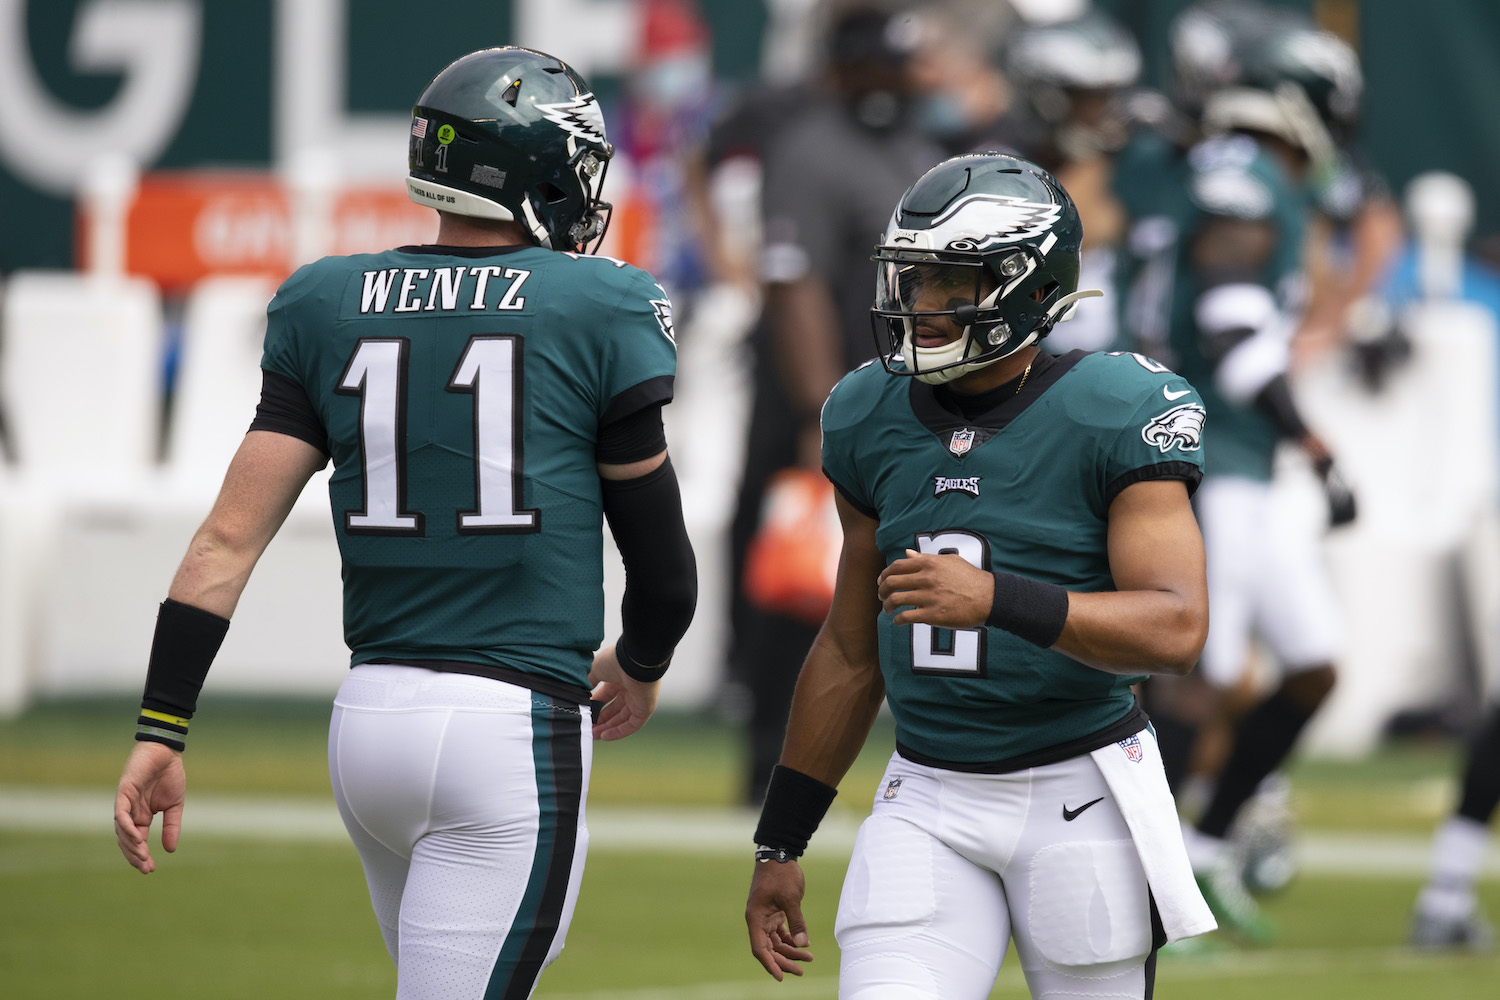 Carson Wentz has been mediocre and Jalen Hurts has been lightly used as the Eagles struggle to figure out their QB situtation.